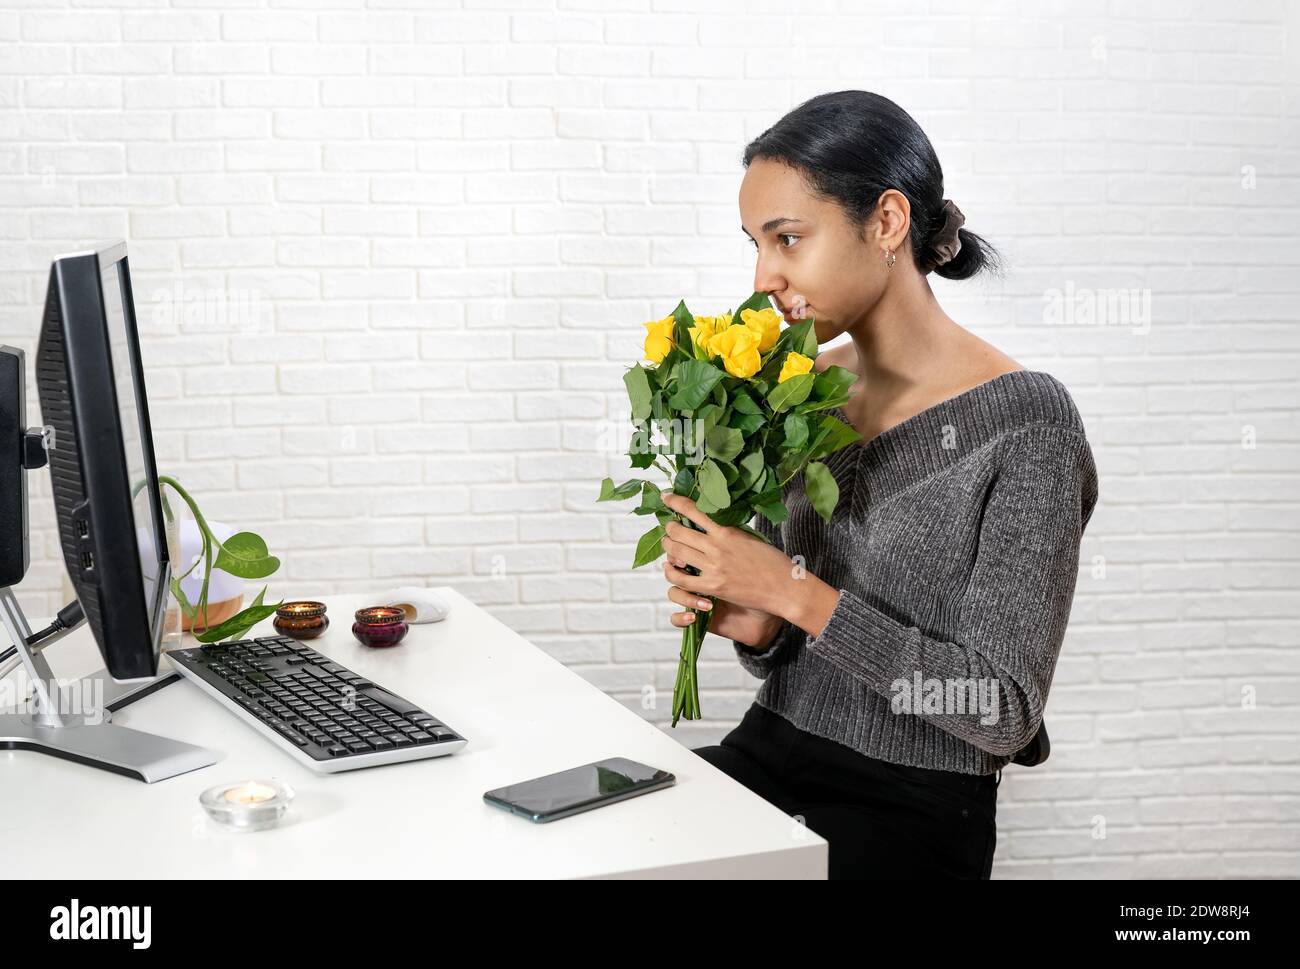 Young pretty woman holds a bunch of yellow roses in front of her face and speaking online Stock Photo